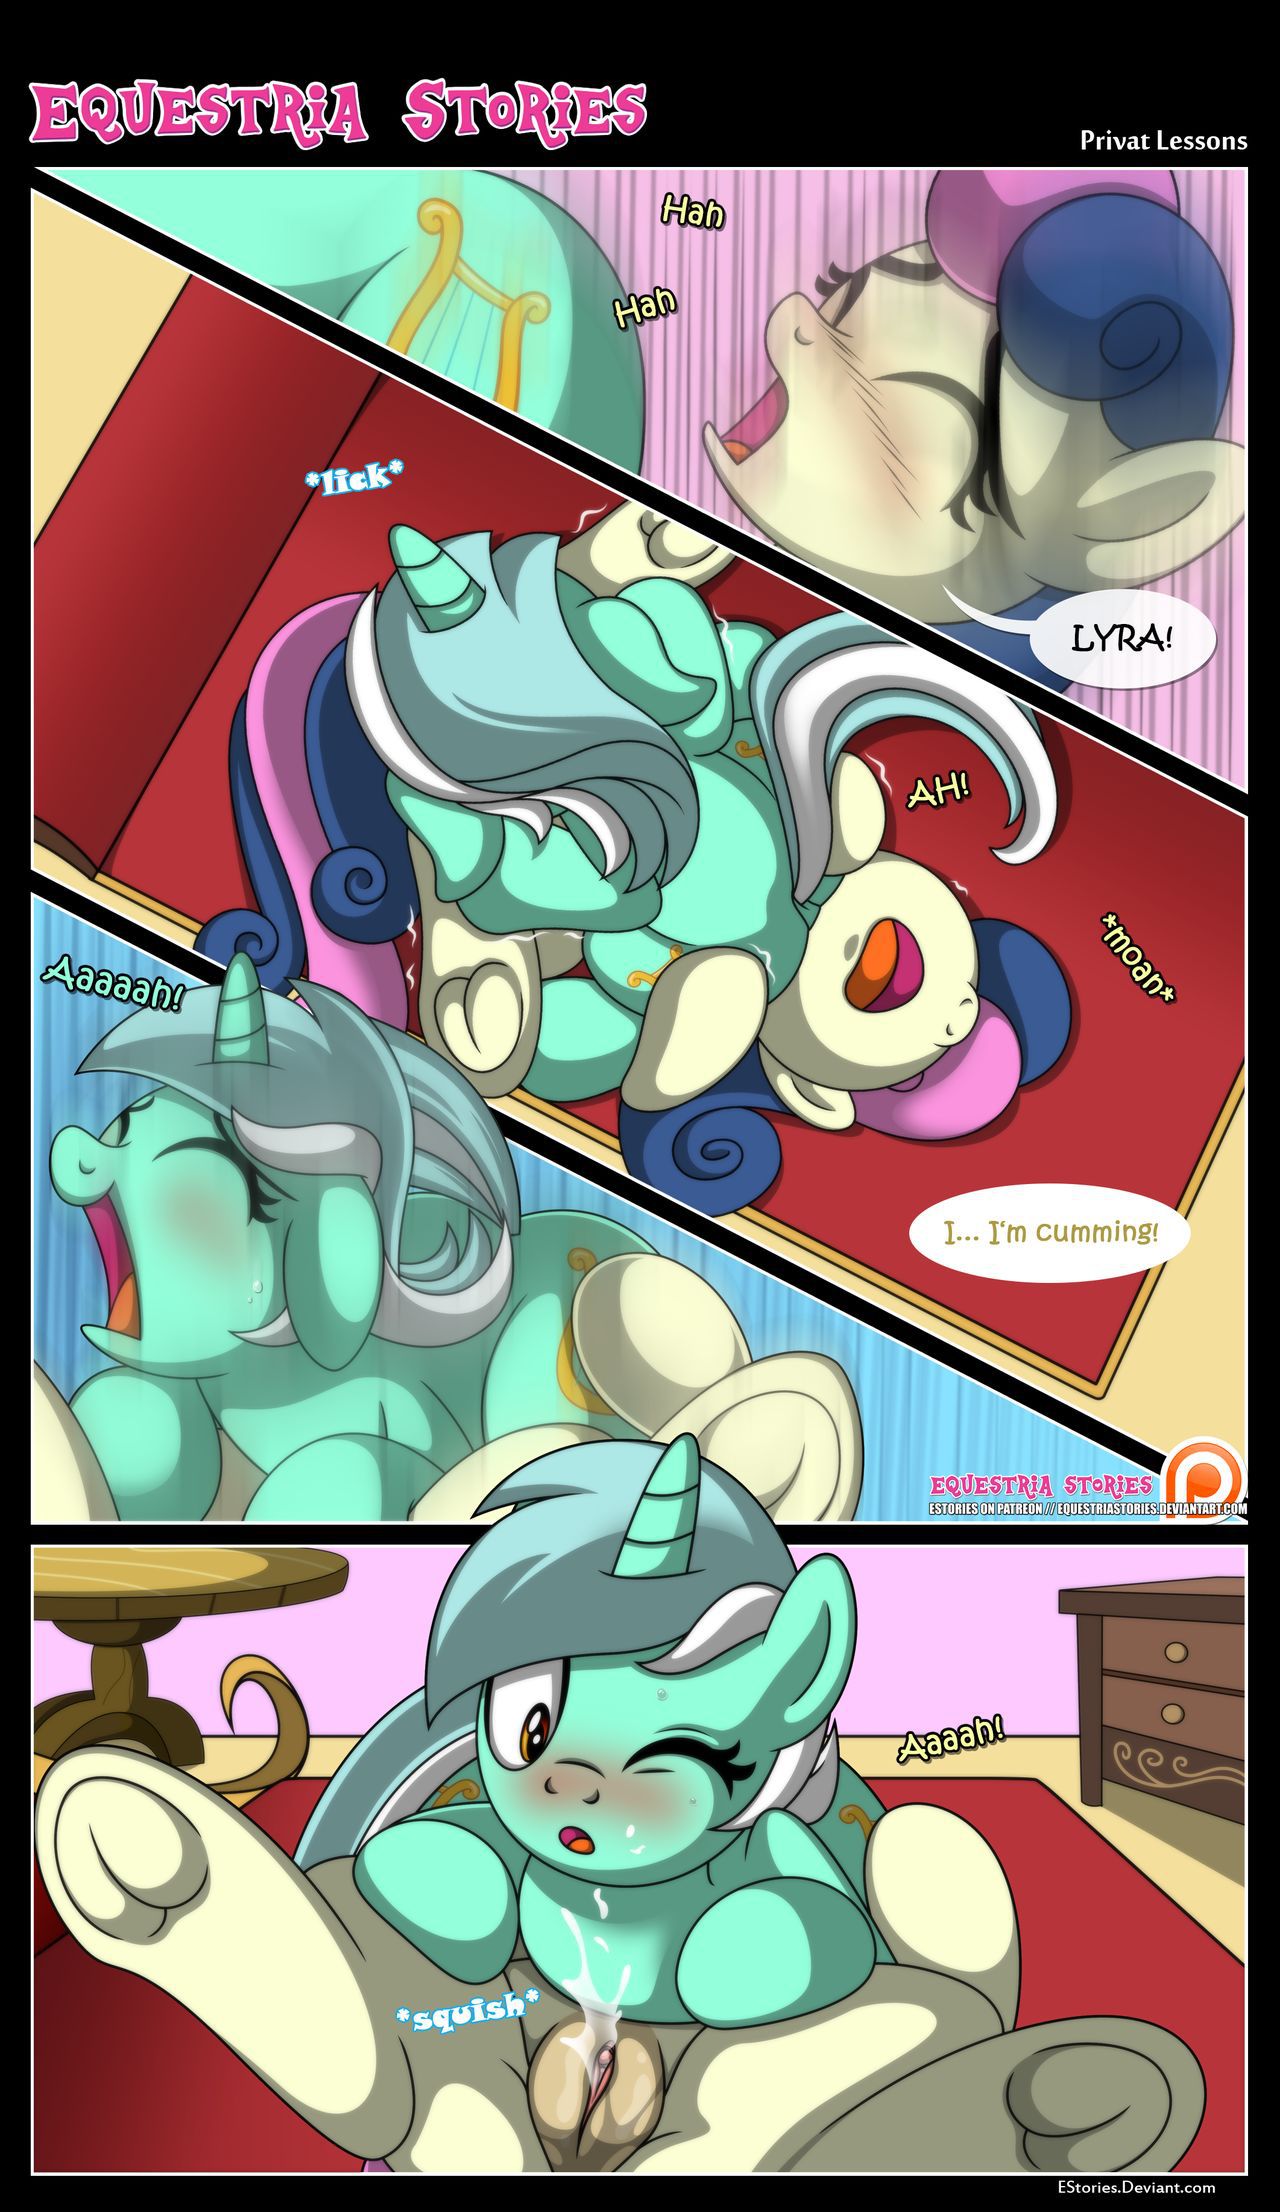 [EStories] Private Lessons (My Little Pony: Friendship is Magic) [English] 10